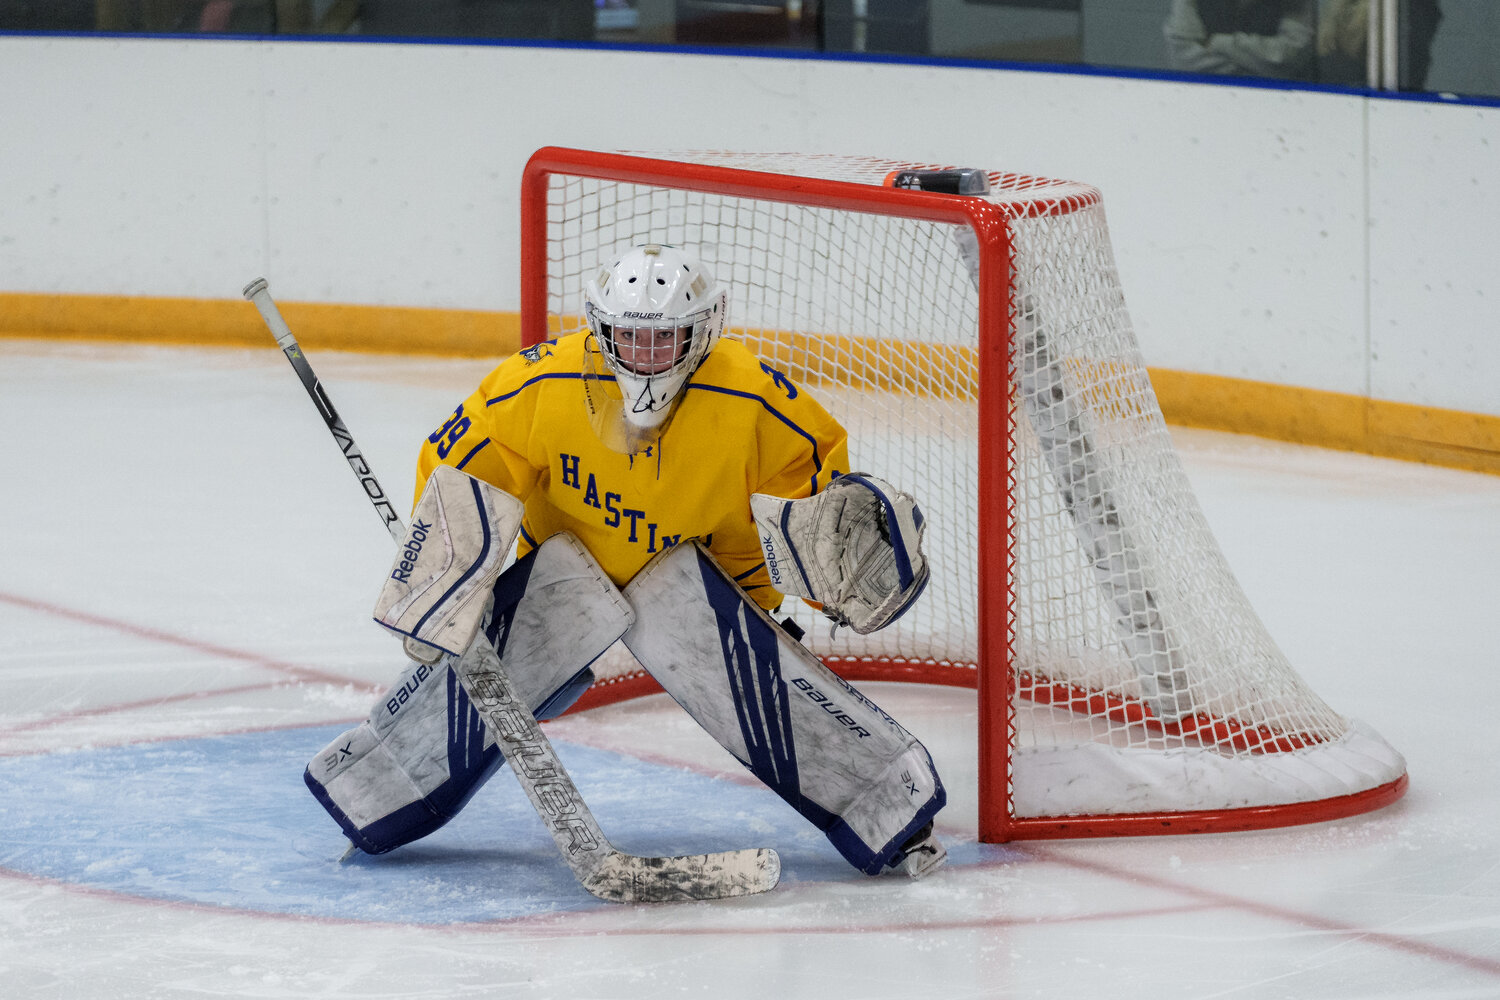 Junior goalie Victoria Steinke has taken on the starting varsity role this season for the Raiders. Steinke performed well in the season opener against Red Wing making the few breakaway shots the Wingers had look boring and routine. The Raider defense helped make her varsity debut easier by keeping the Wingers shot count to only 14.